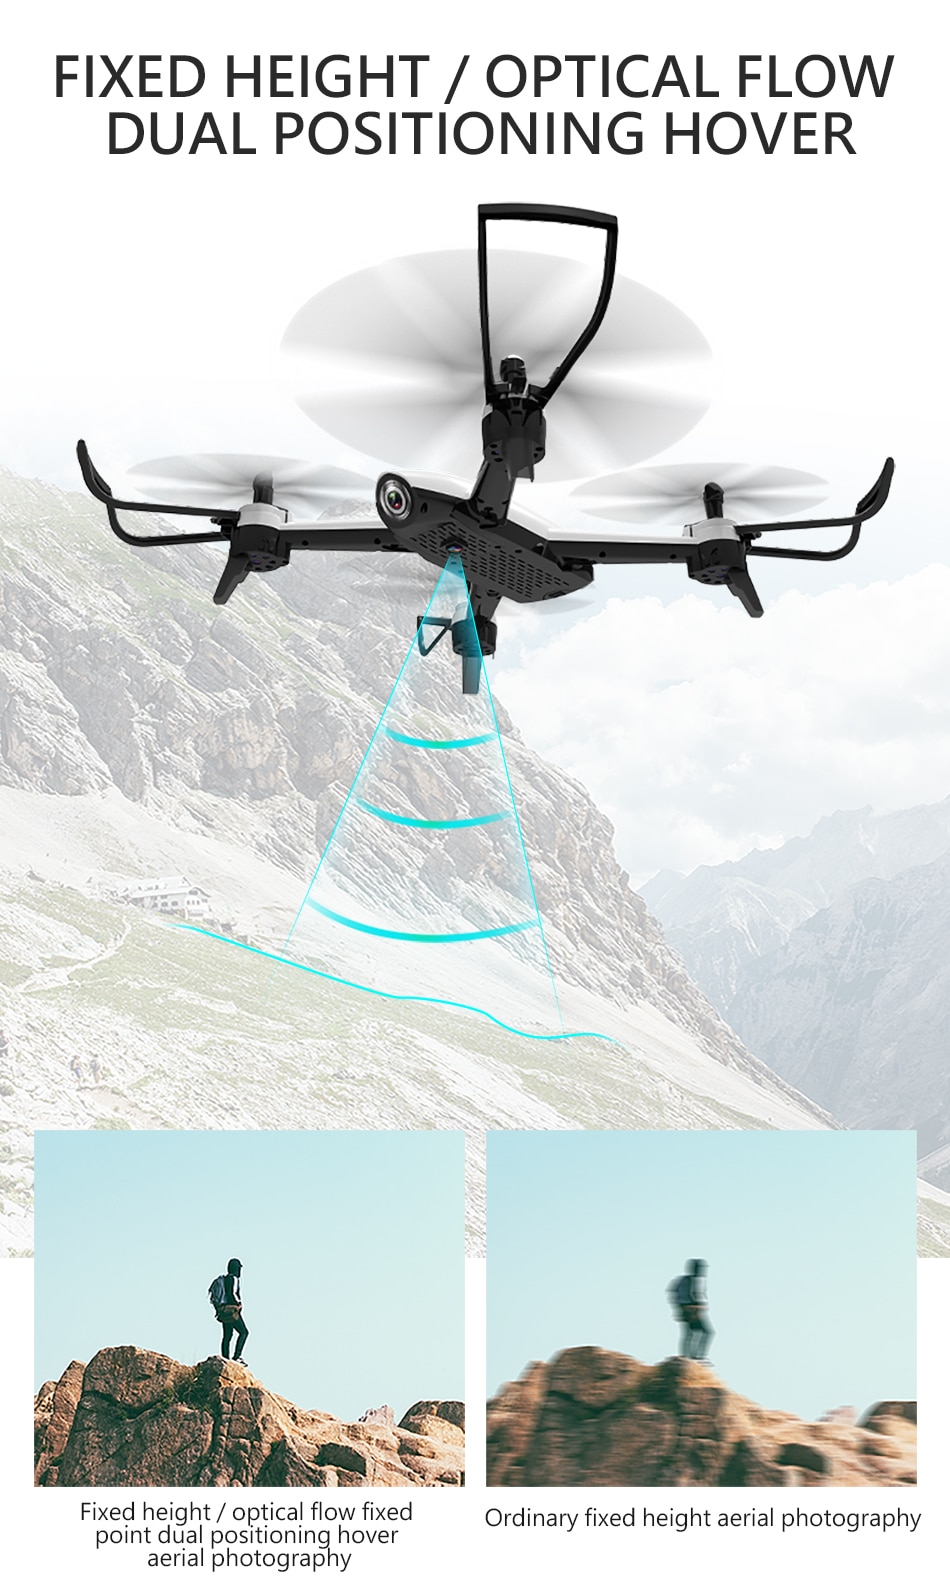 ZLL-SG106-Drone-Dual-Camera-drones-4K-1080P-720P-24G-WIFI-PFV-Optical-Flow-20mins-fly-time-Quadrocop-1005001999969102